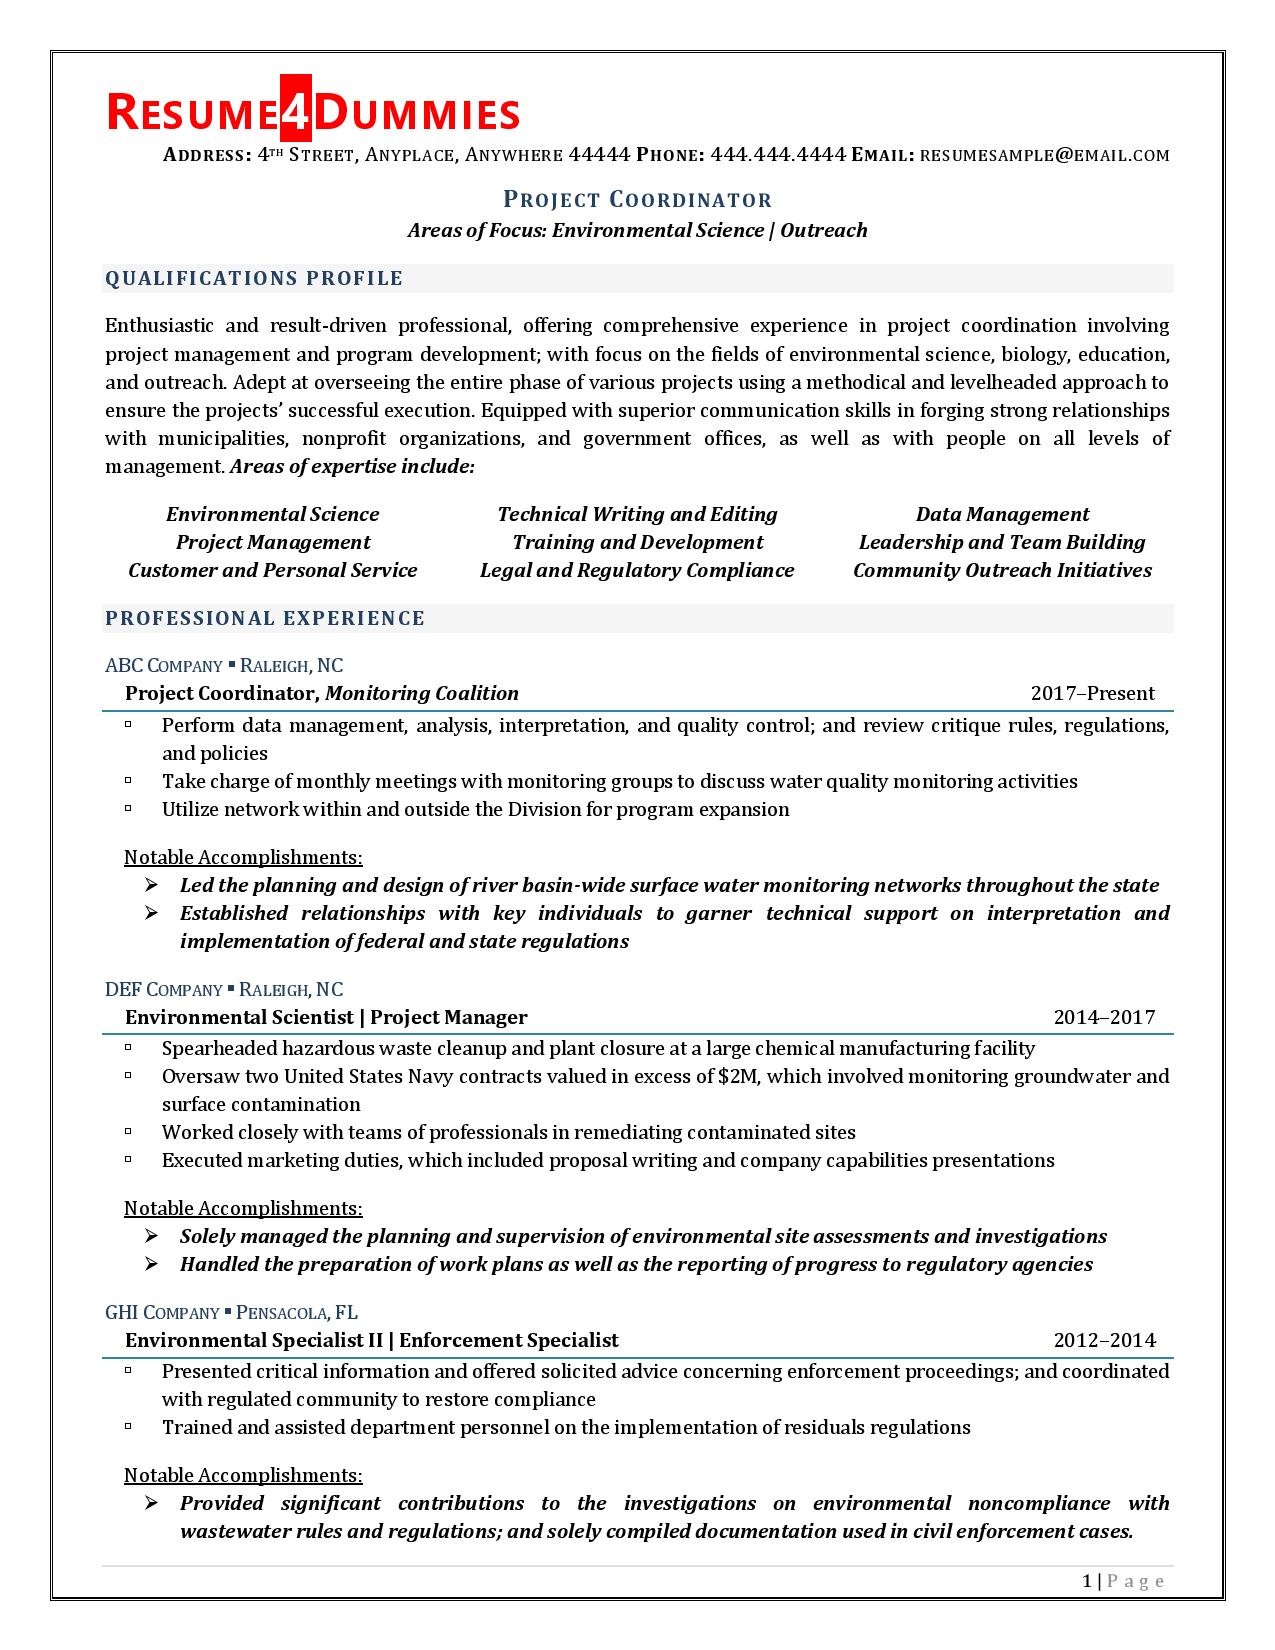 project manager responsibilities resume